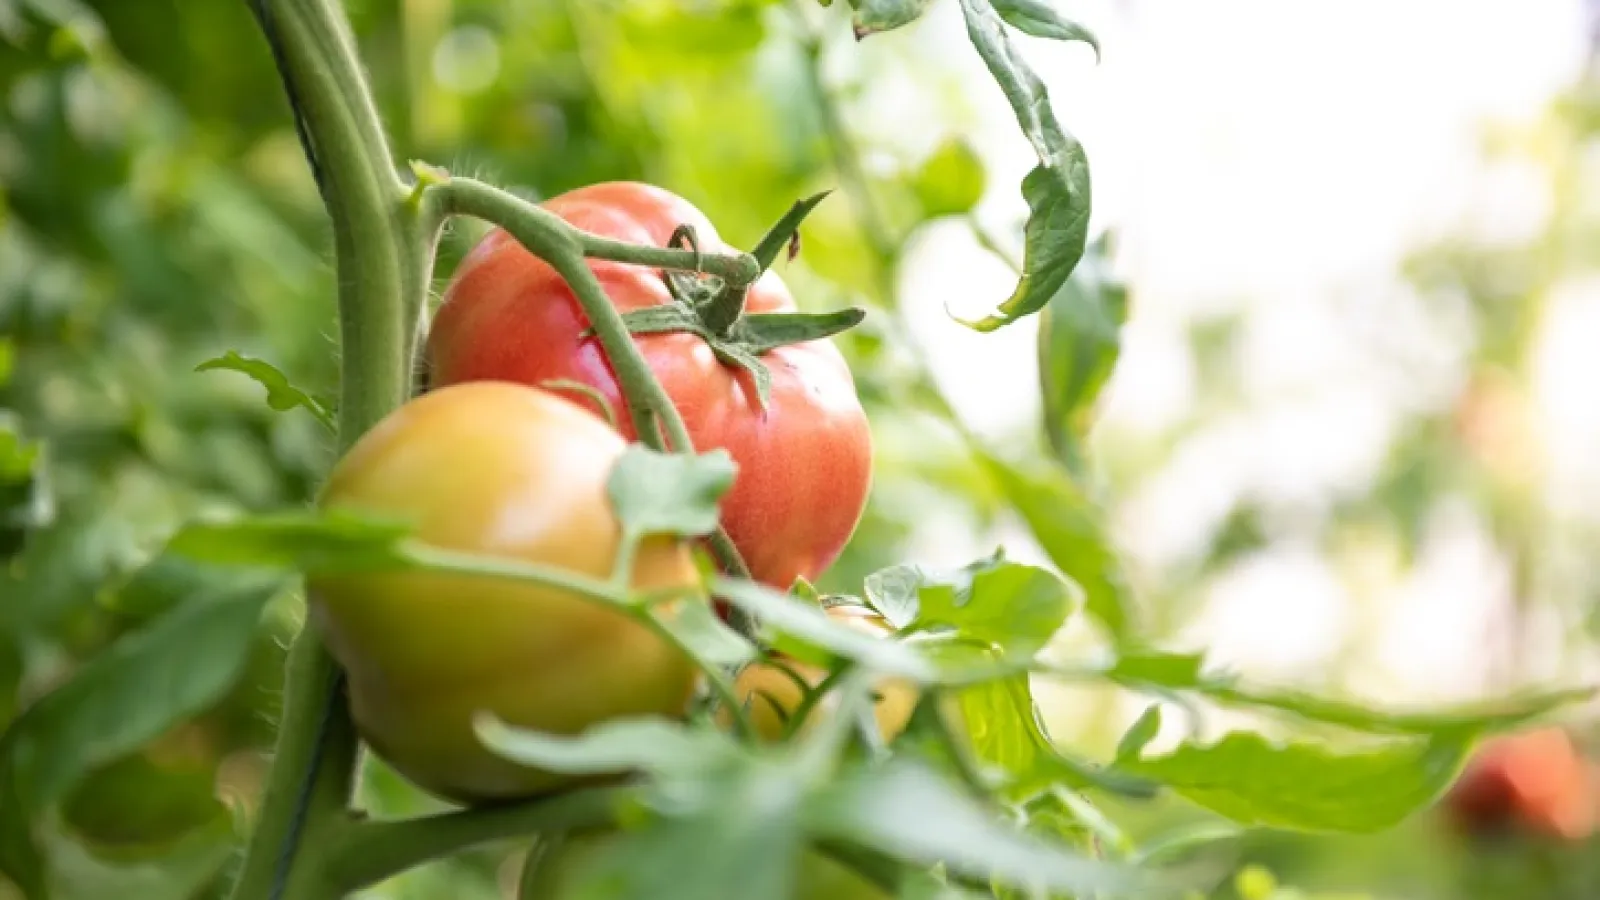 a group of tomatoes growing on a plant